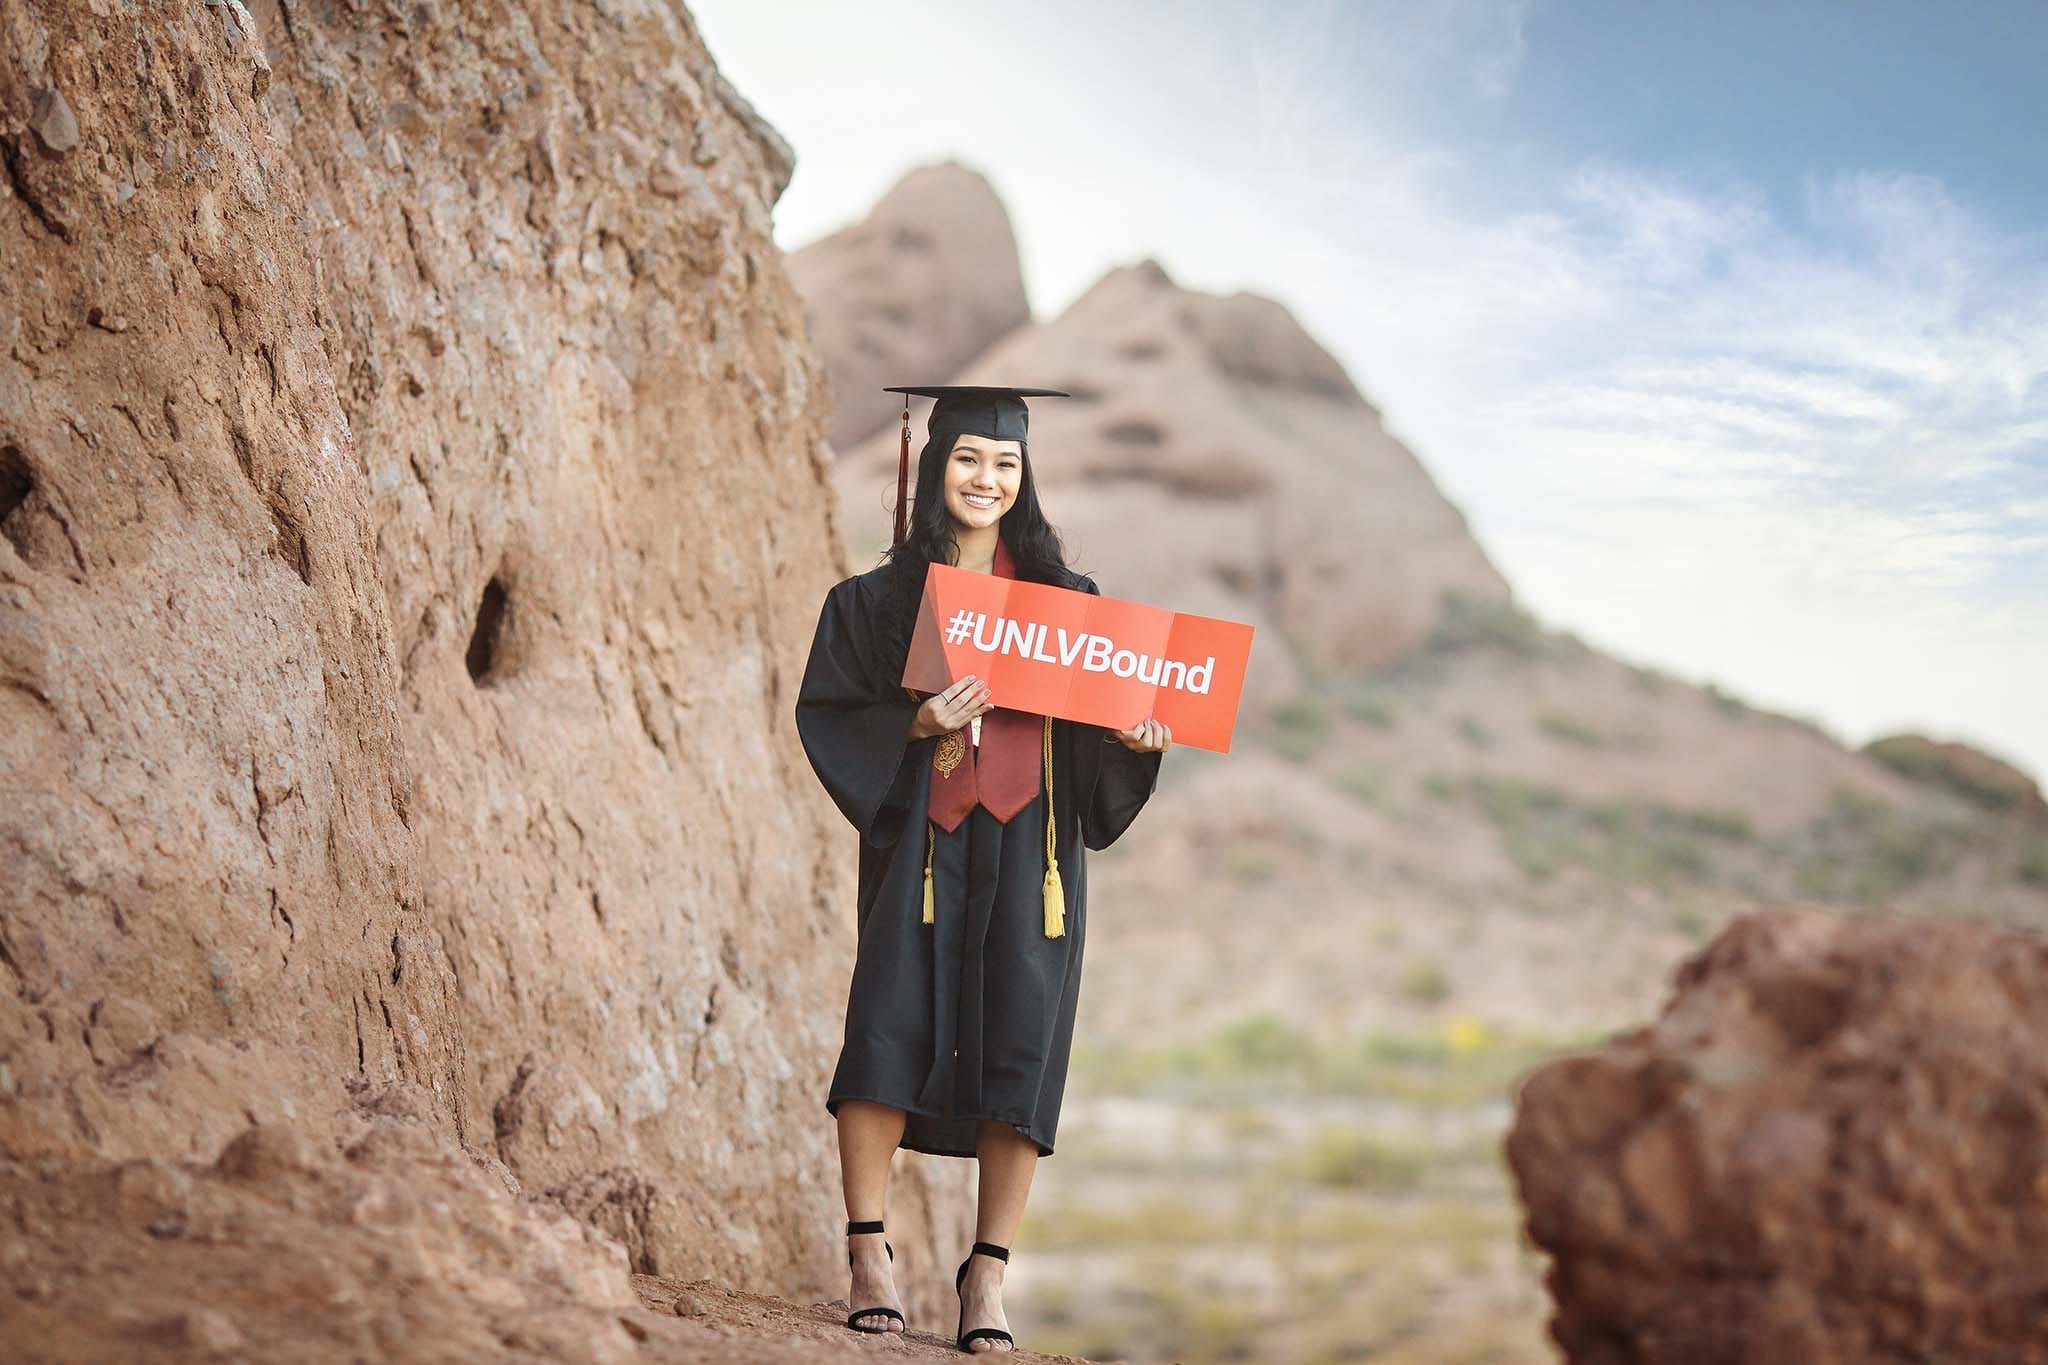 Graduation Photos at the top of the Hole in the Rock at papago Park near Central Phoenix